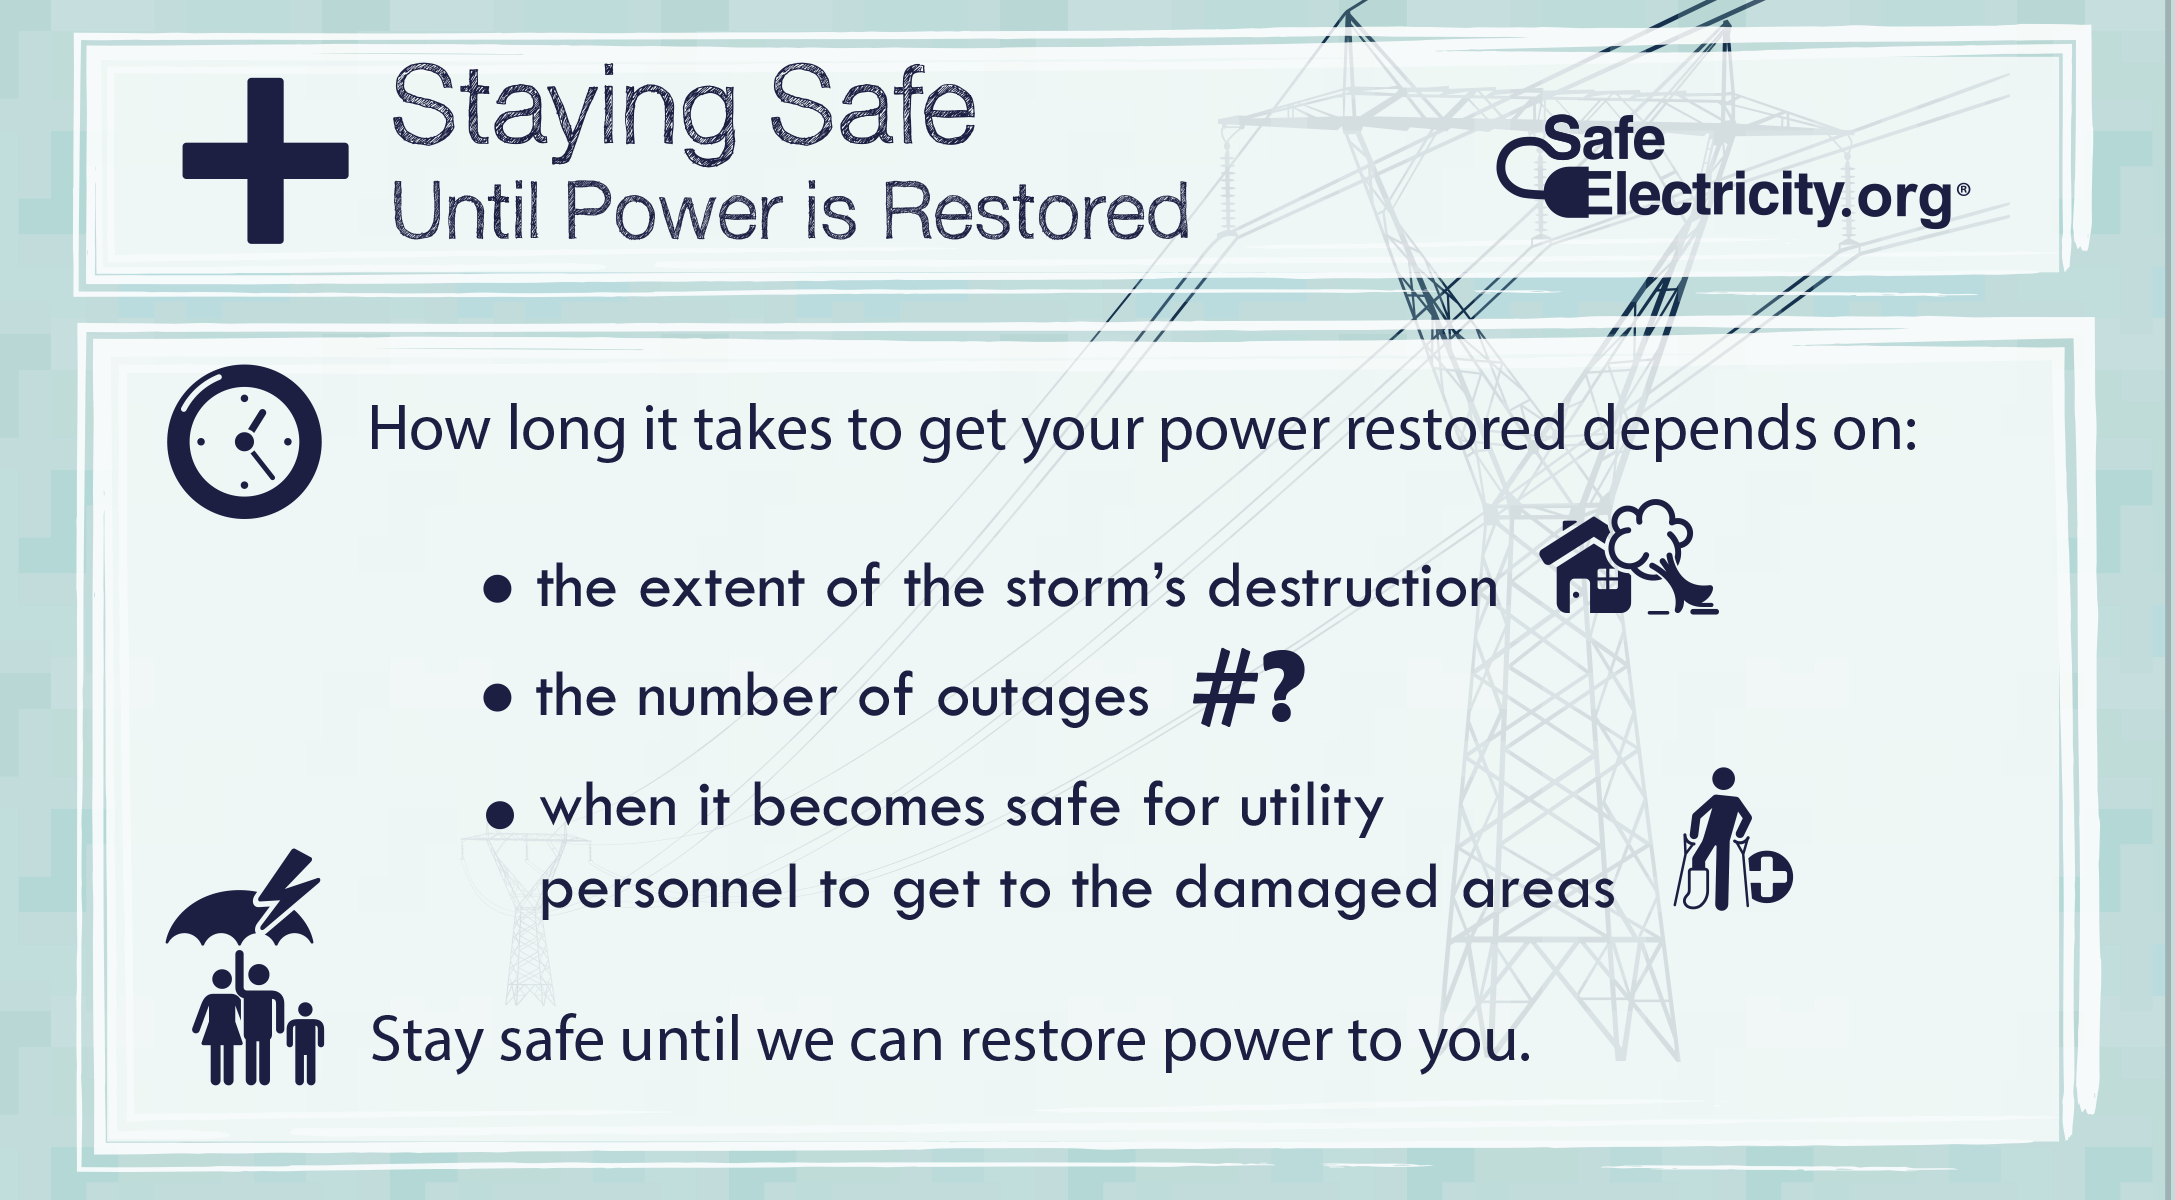 How long it takes to get your power restored depends on: the extent of the storm's destruction, the number of outages, when it becomes safe for utility personnel to get to the damaged areas. Stay safe until we can restore power to you. 